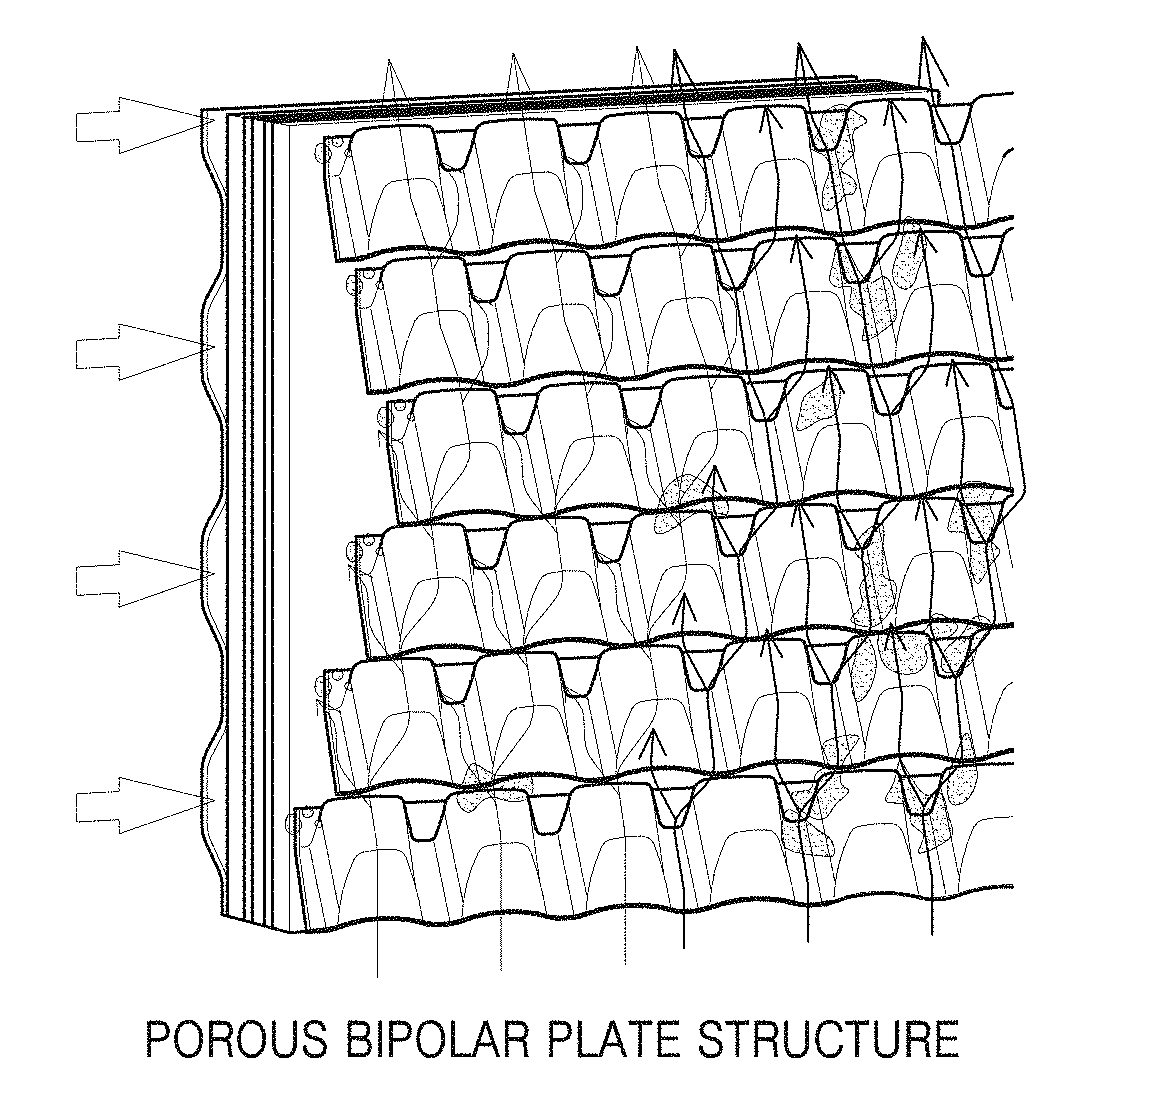 Multi-layered carbon substrate for gas diffusion layer